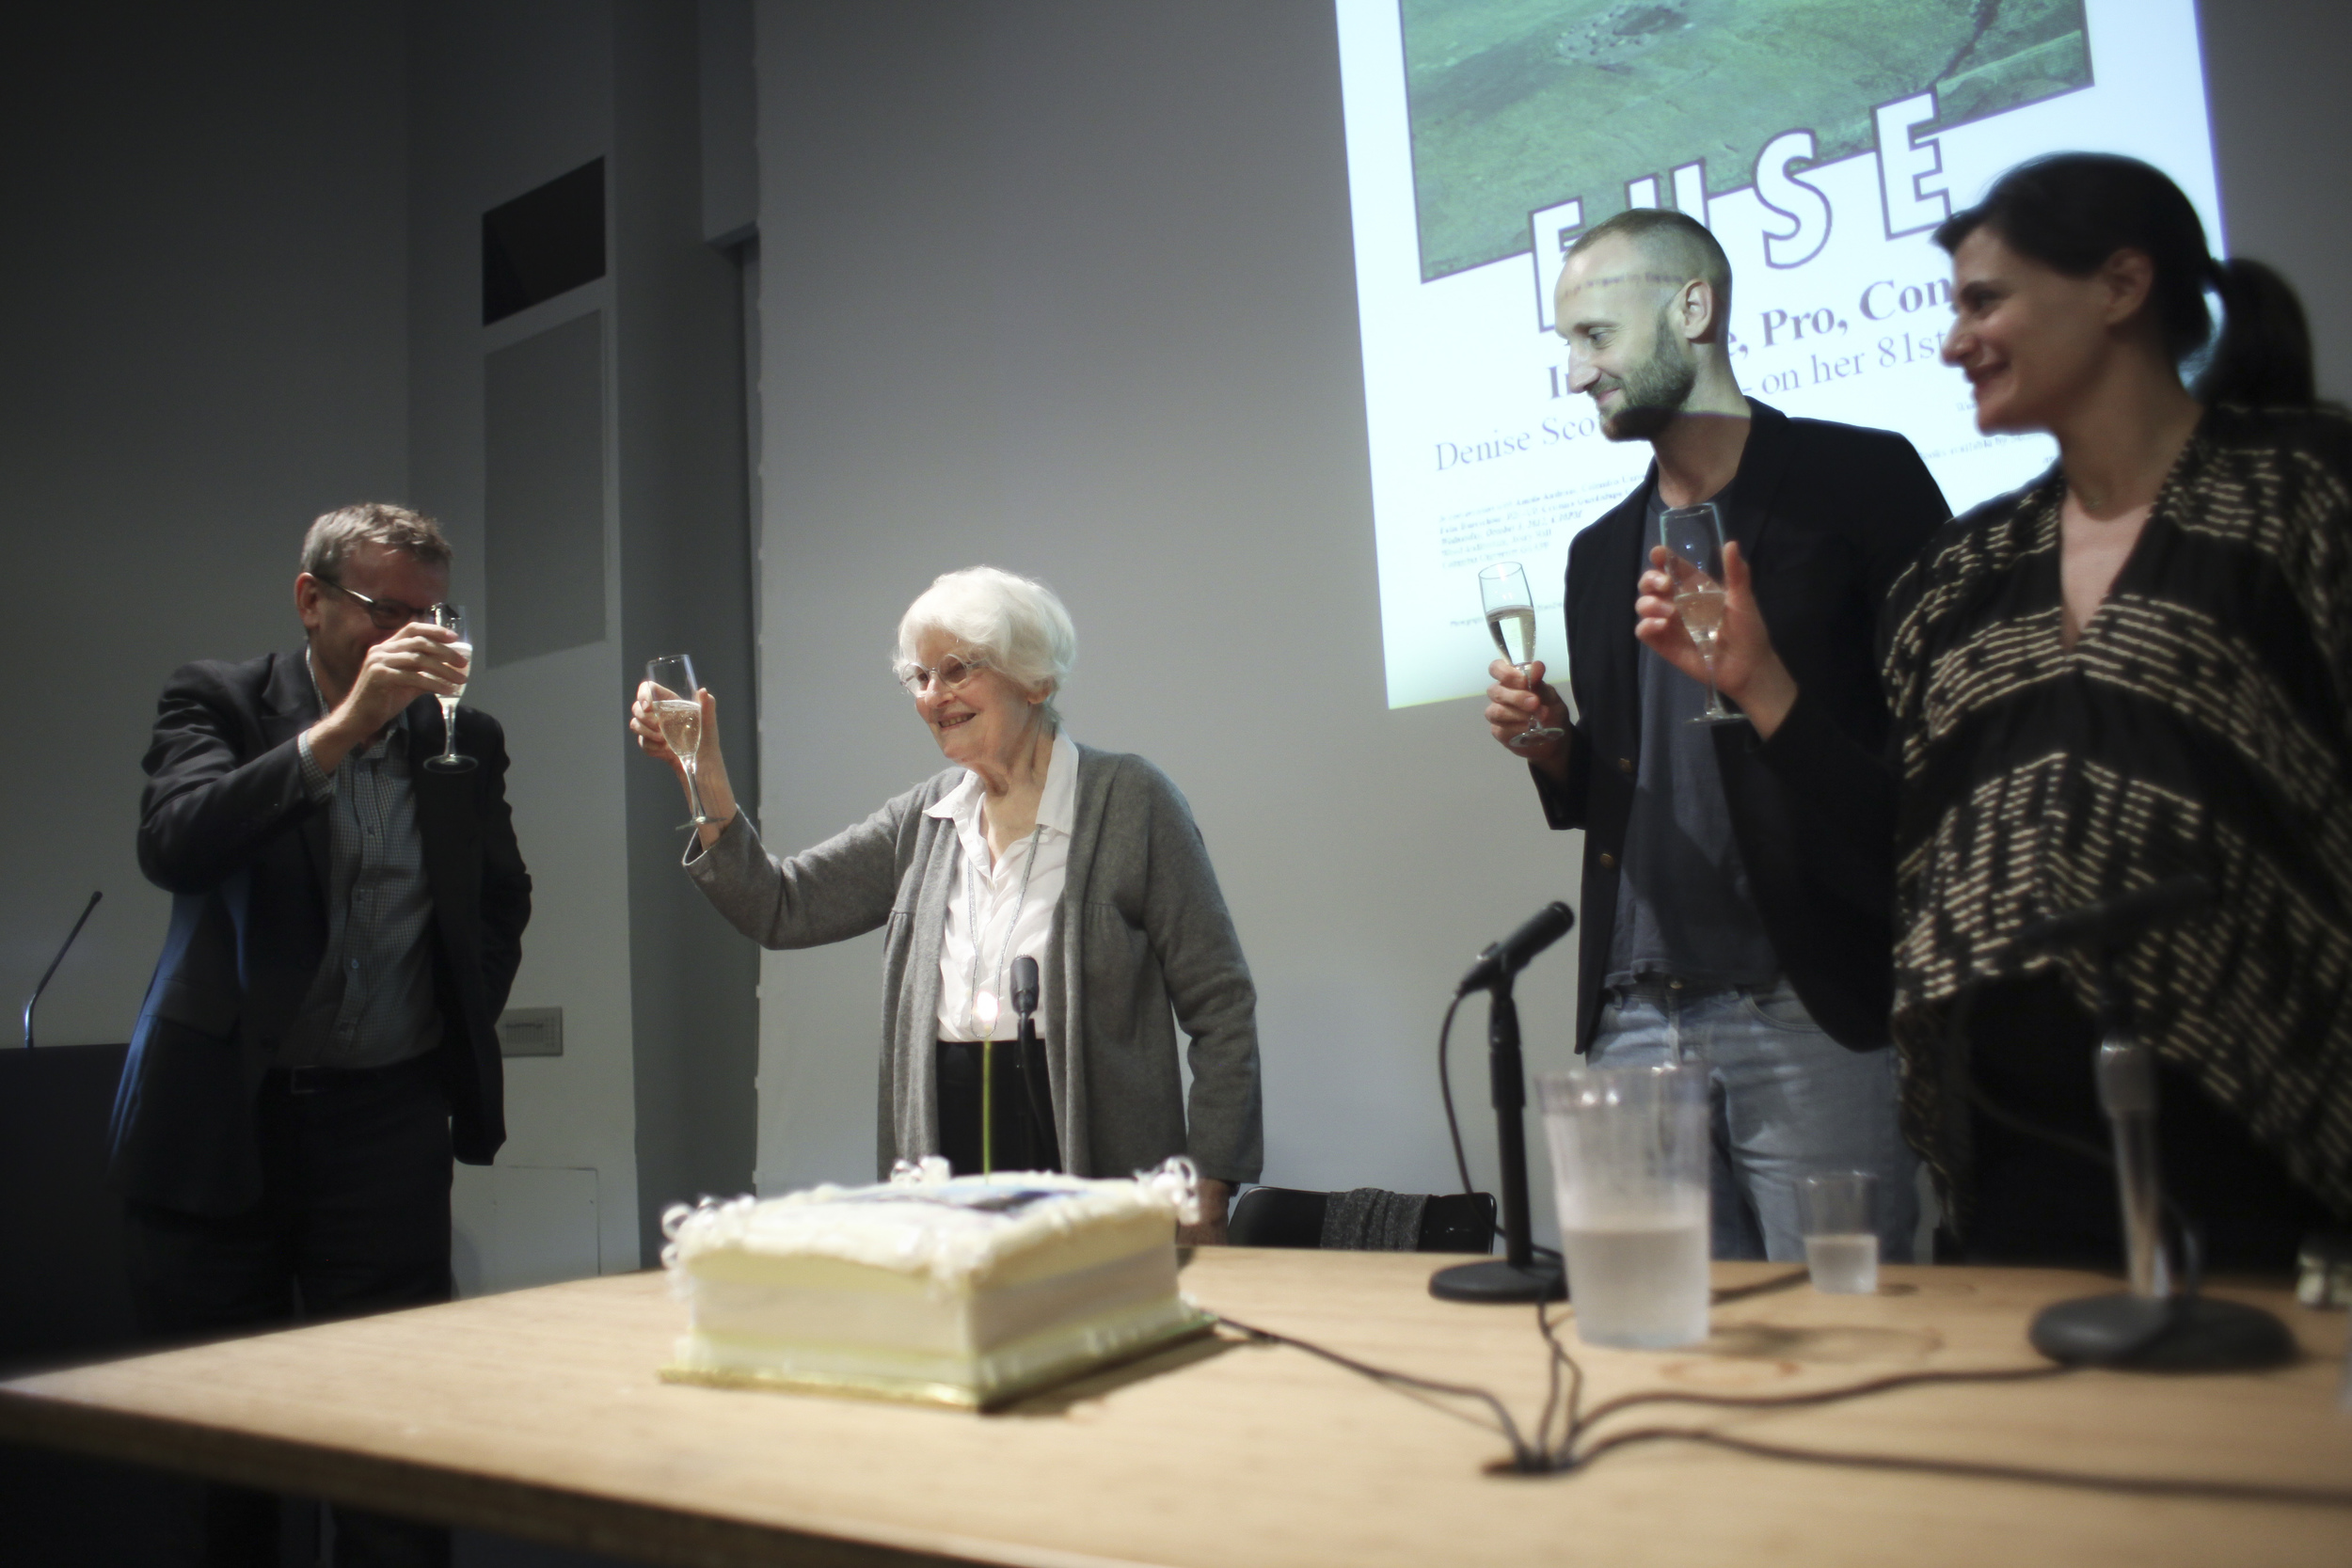  Denise Scott Brown is toasted by Mark Wigley, Felix Burrichter, and Amale Andraos on her 81st birthday. October 3, 2012, Wood Auditorium, Columbia University.  